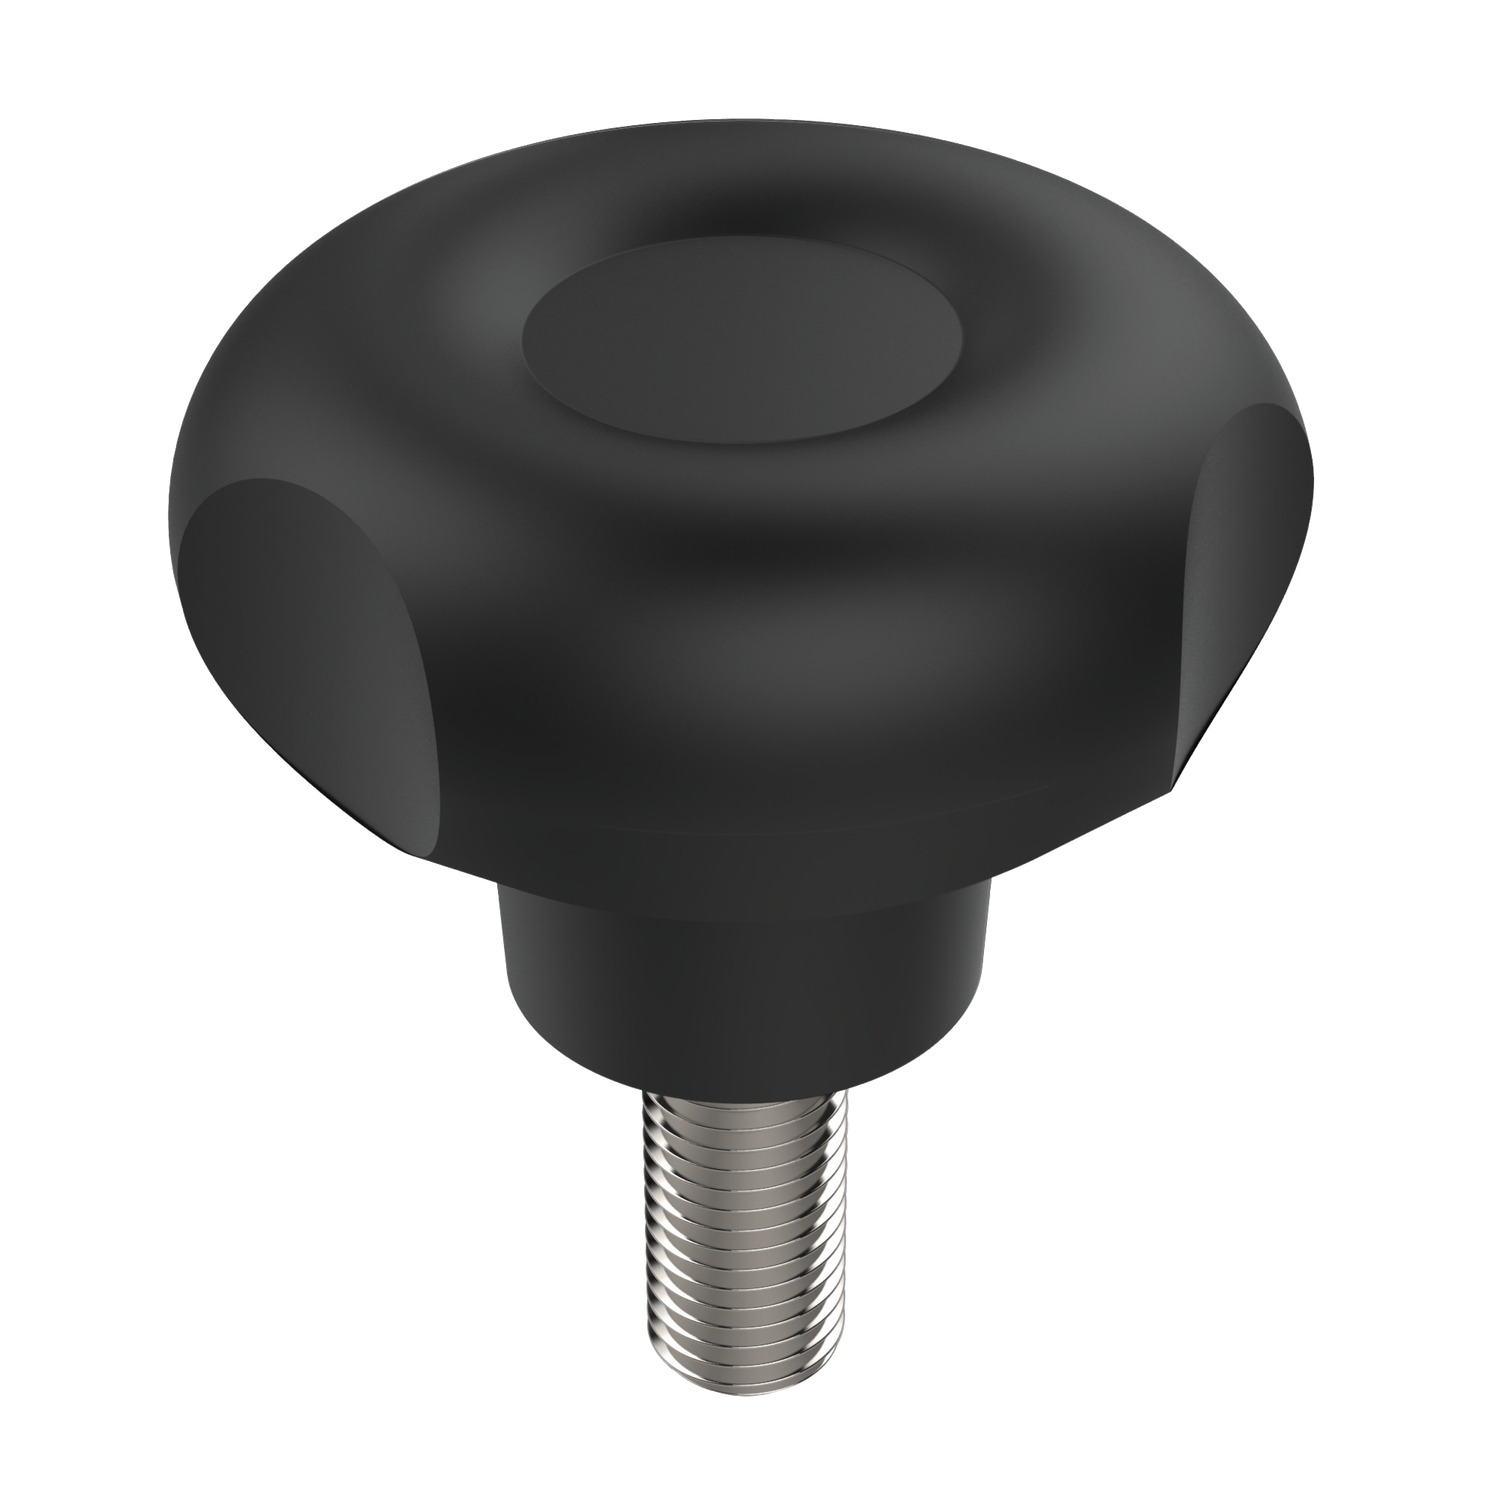 Three Lobe Knob Three lobed knobs with stainless steel grub screw. Metric sizes from M6 to M10. Handle made from black thermoplastic.